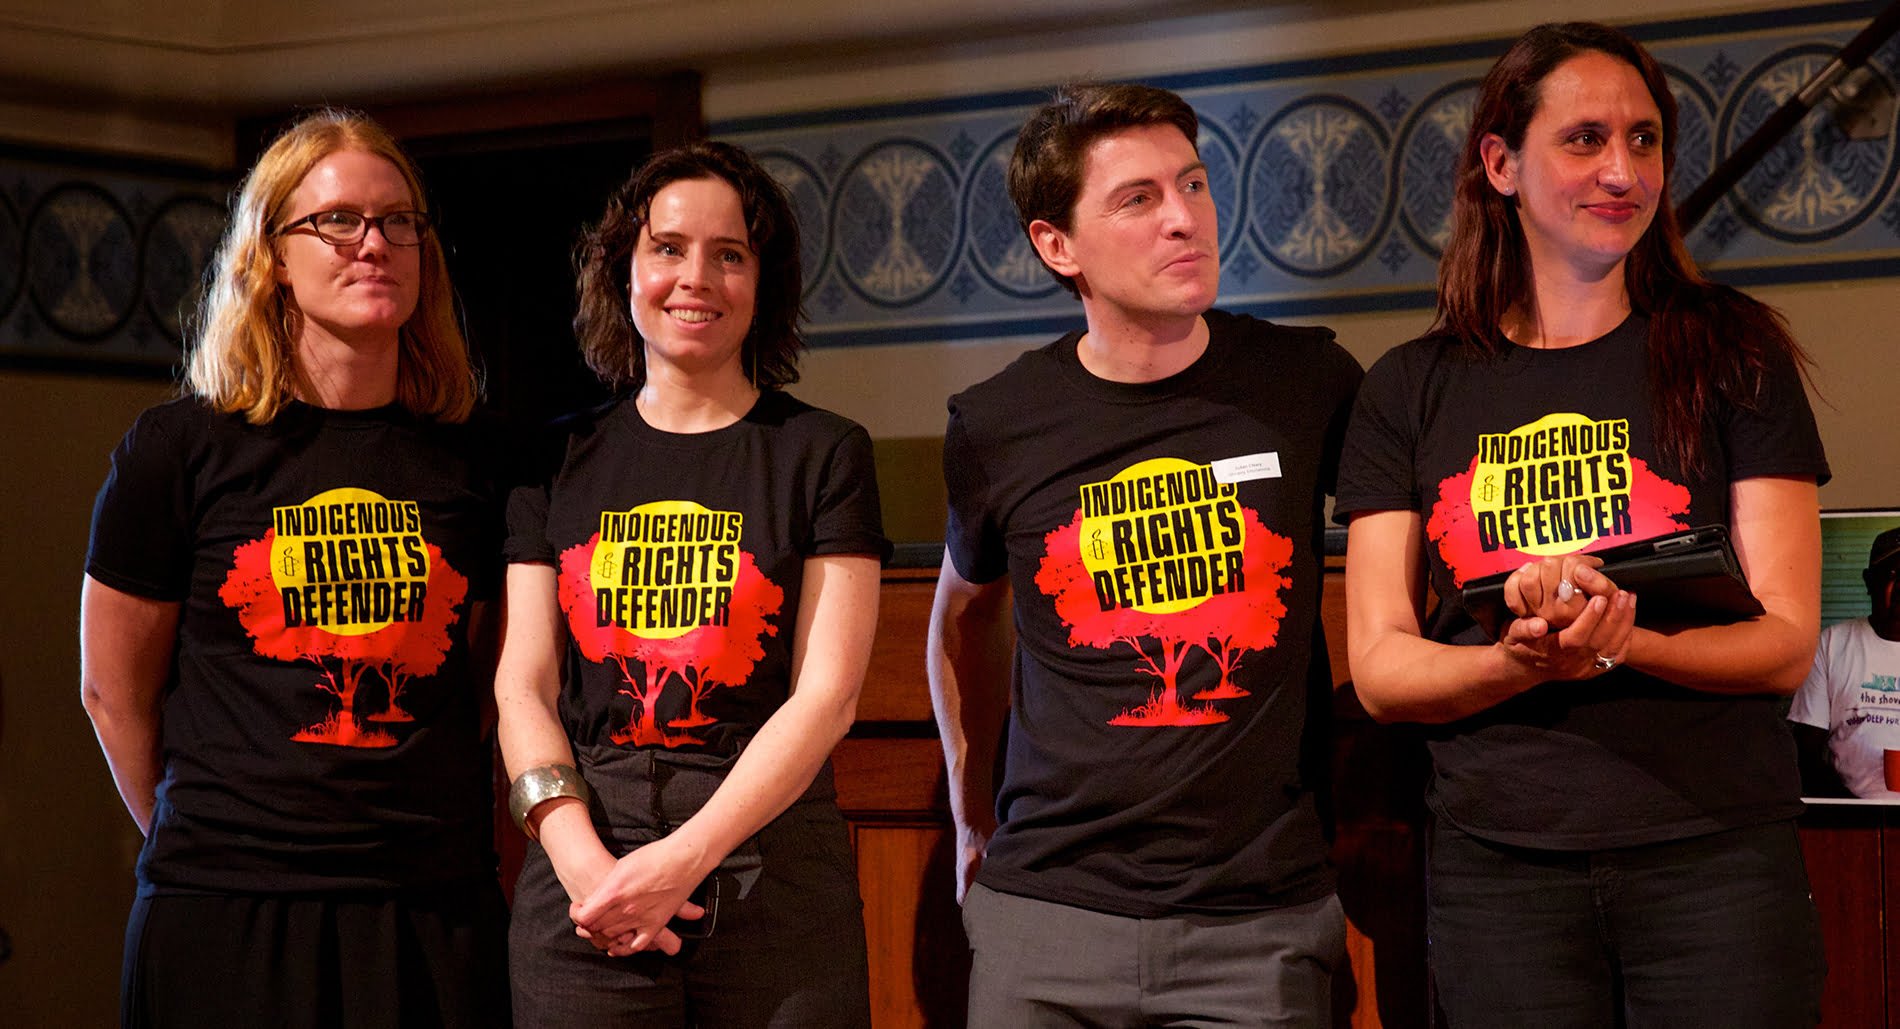 Amnesty campaigners wearing 'Indigenous rights defender' shirts